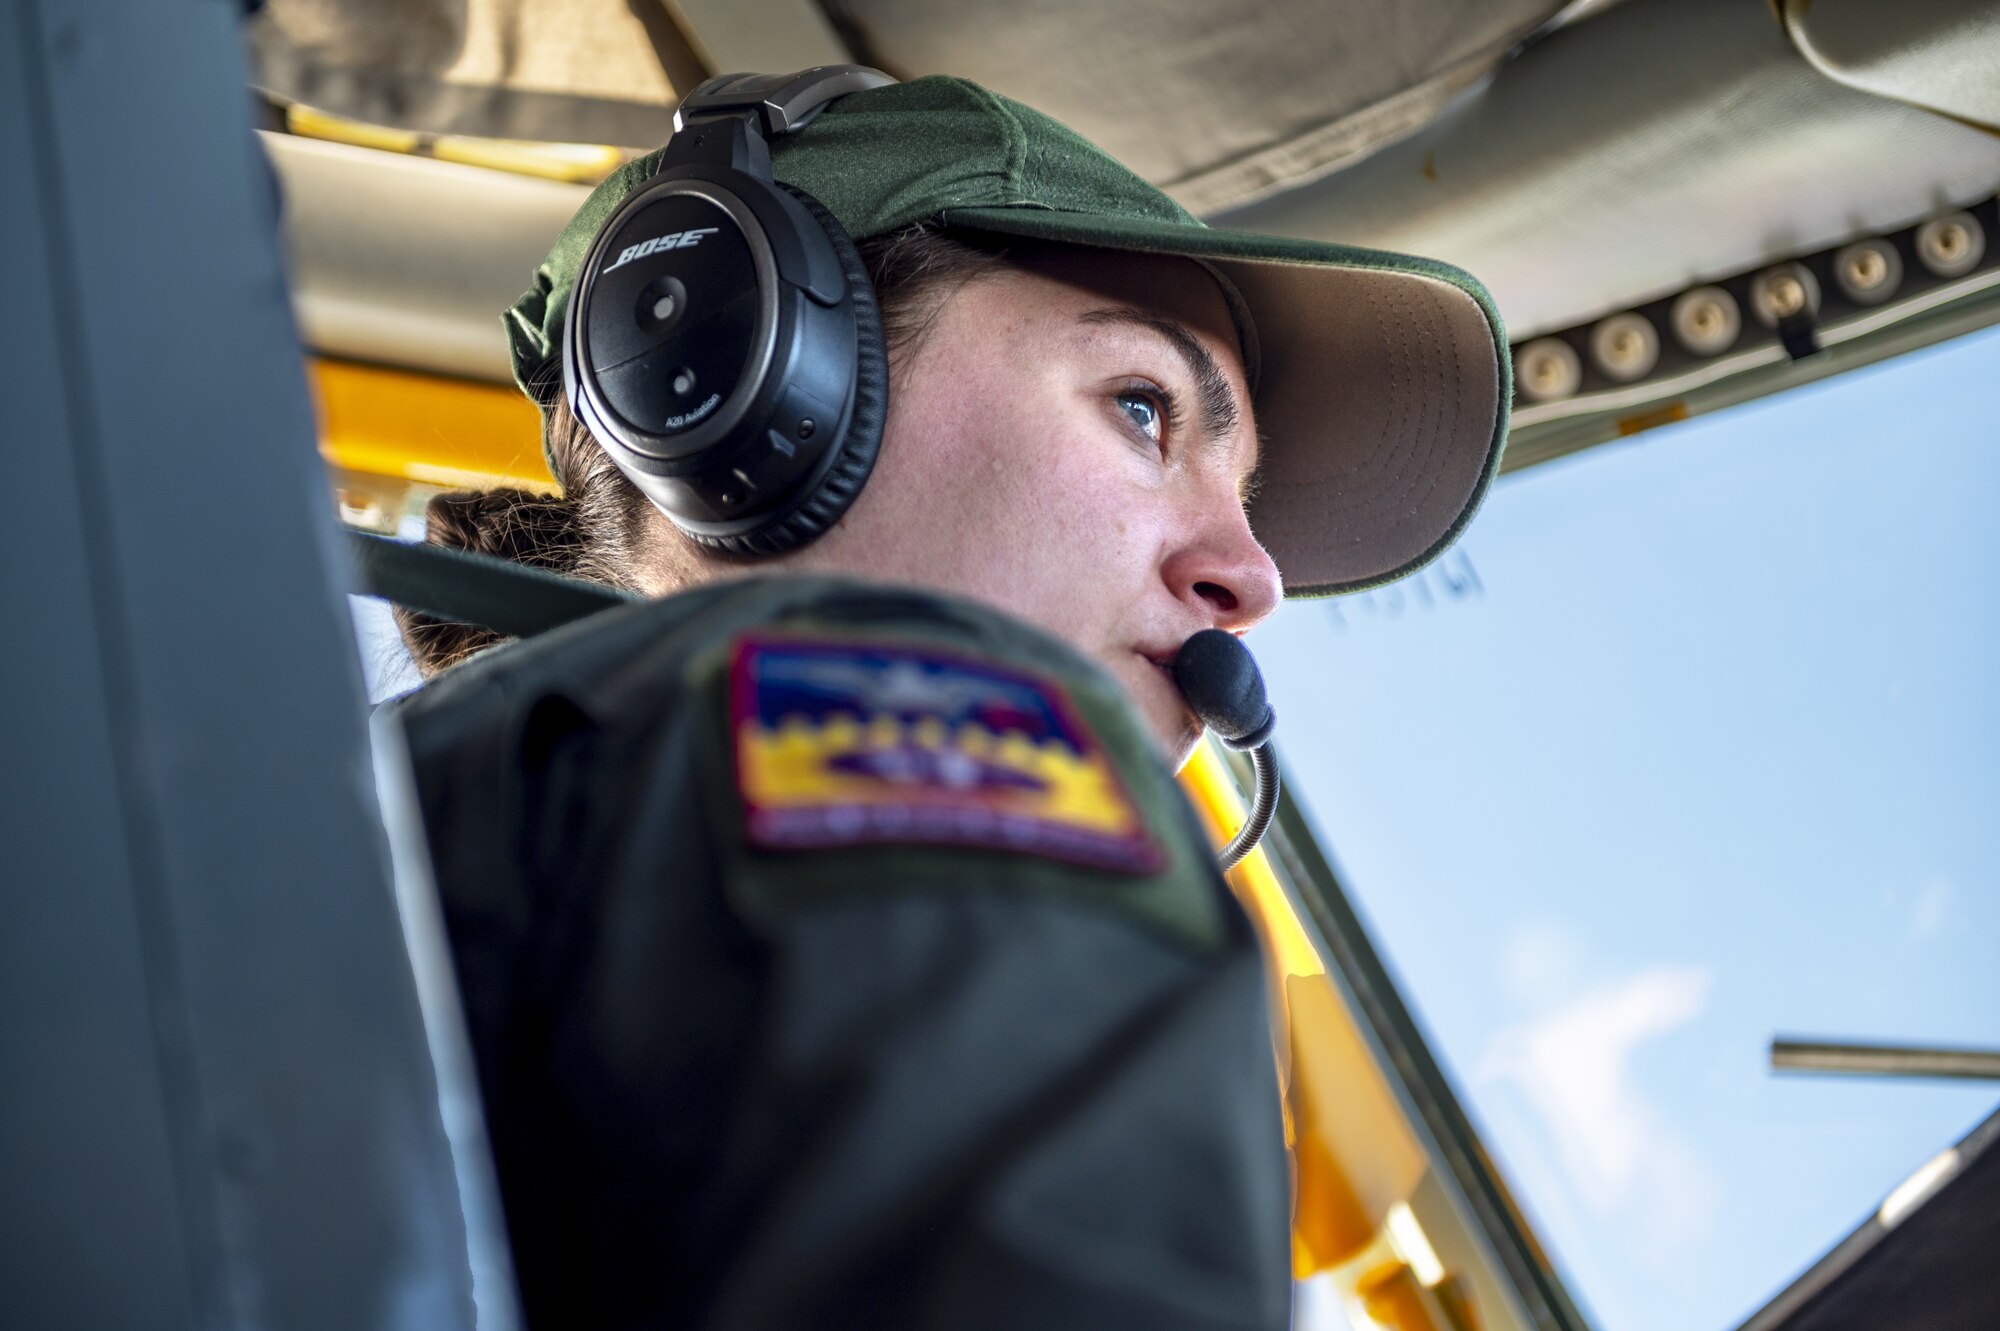 U.S. Air Force Capt. Christina Kelvin, 384th Air Refueling Squadron pilot, flies a KC-135 Stratotanker en route to Eielson Air Force Base, Alaska, March 7, 2023. Aircrew from the 384th Air Refueling Squadron conducted an air refueling coronet with Marines from the Marine Fighter Attack Squadron 312, demonstrating the critical role mobility forces have in projecting the joint force anywhere, anytime. (U.S. Air Force photo by Staff Sgt. Lawrence Sena)